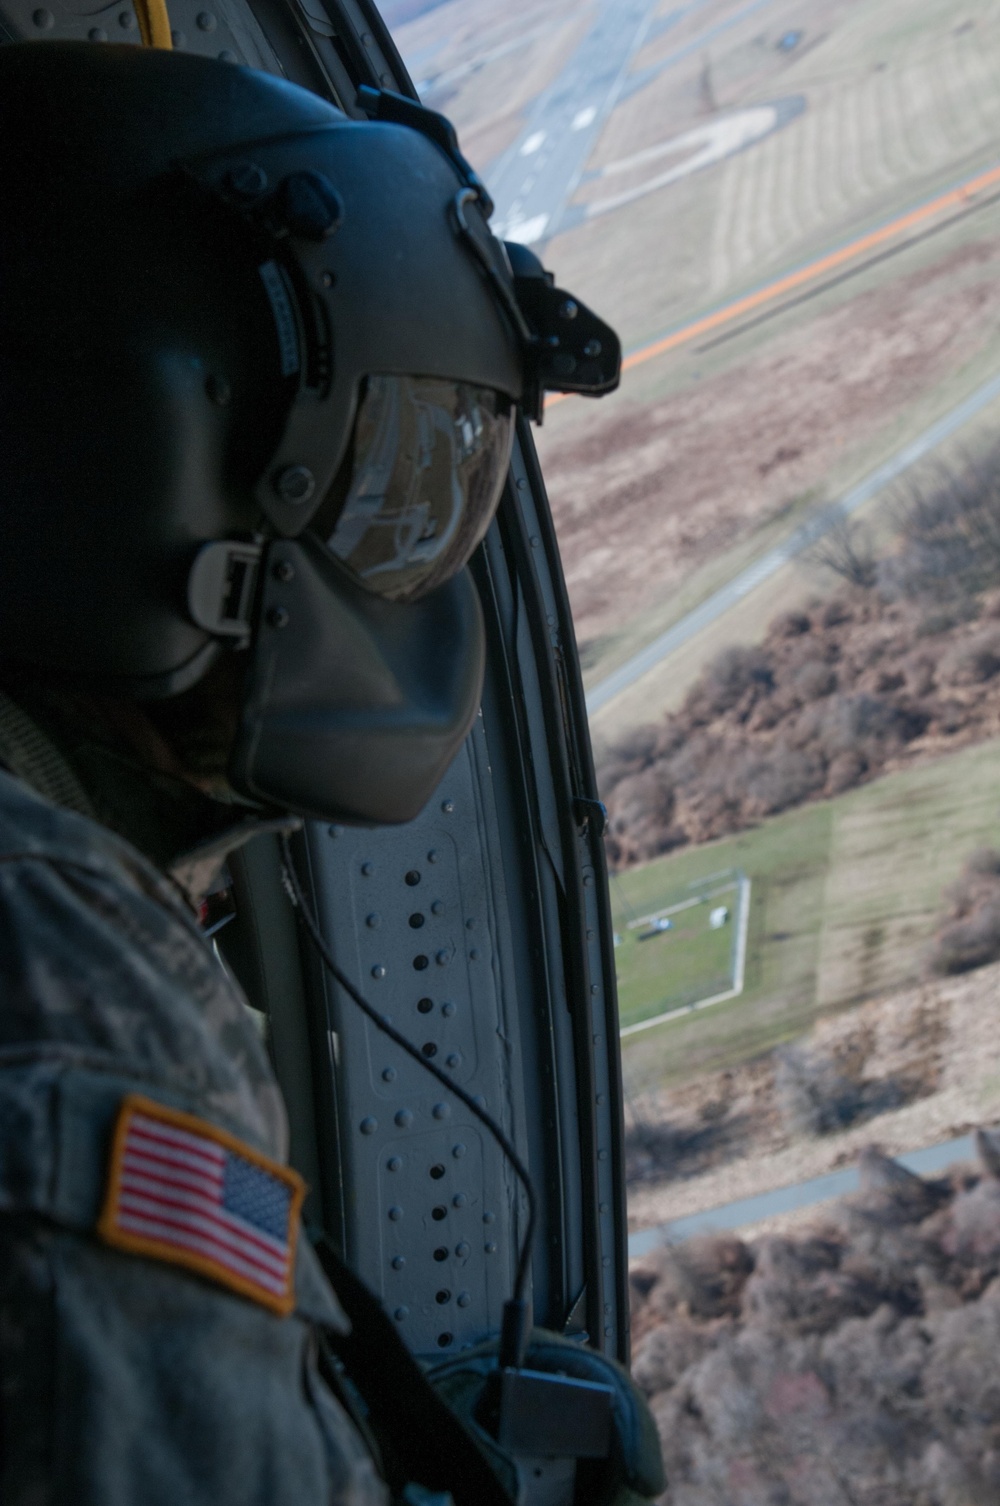 231st Chemical Company conducts rotary-wing training